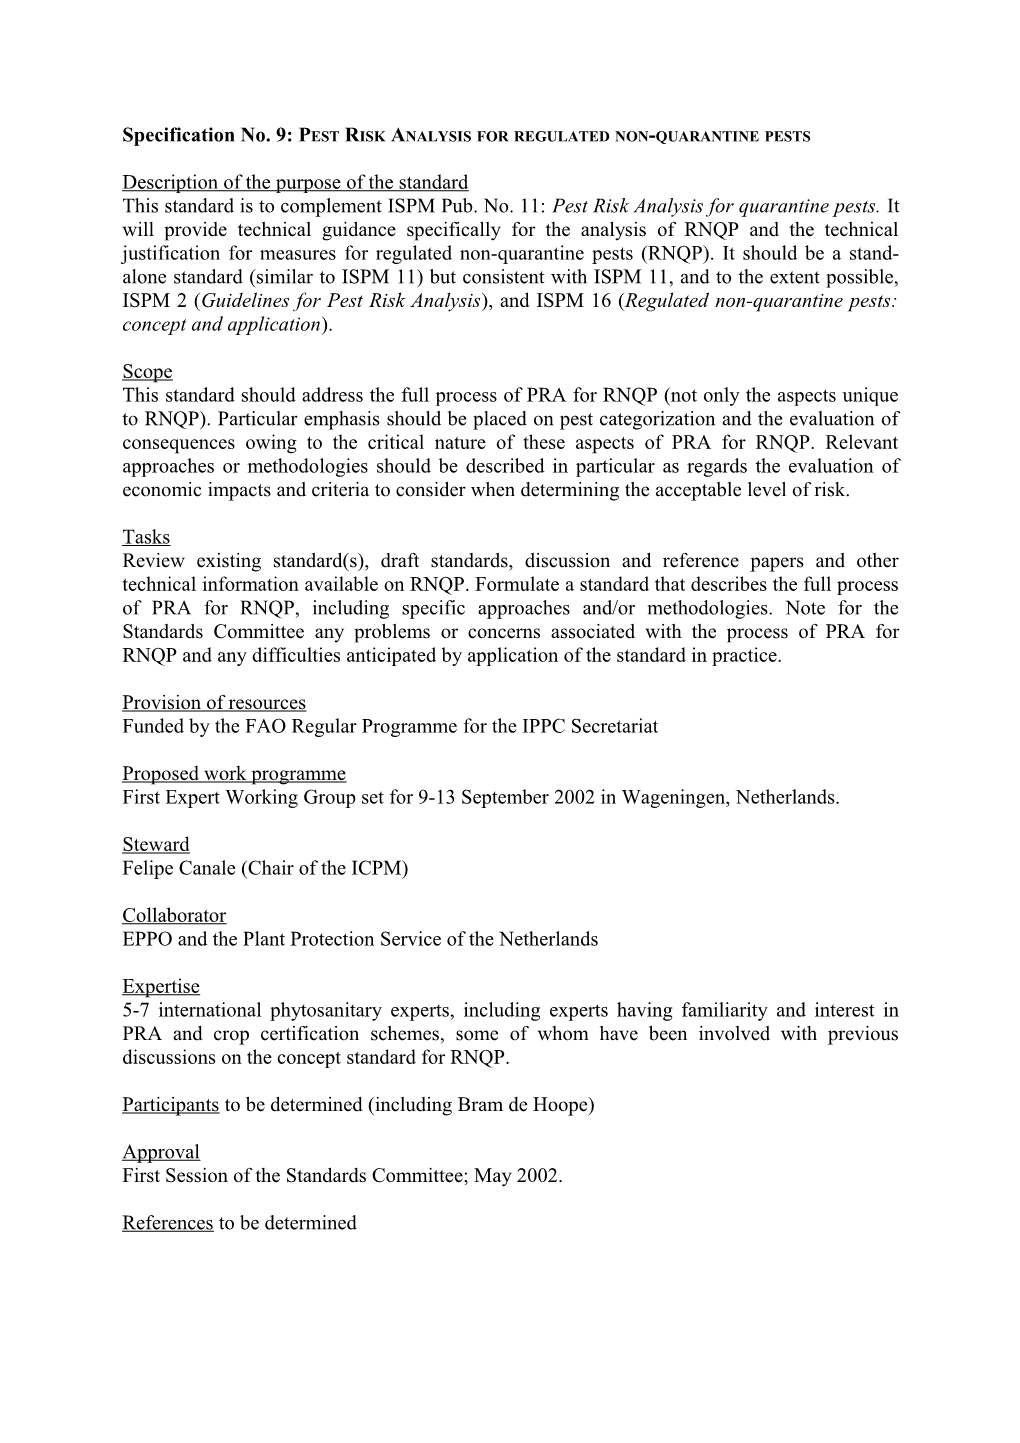 Specification No. 9: Pest Risk Analysis for Regulated Non-Quarantine Pests